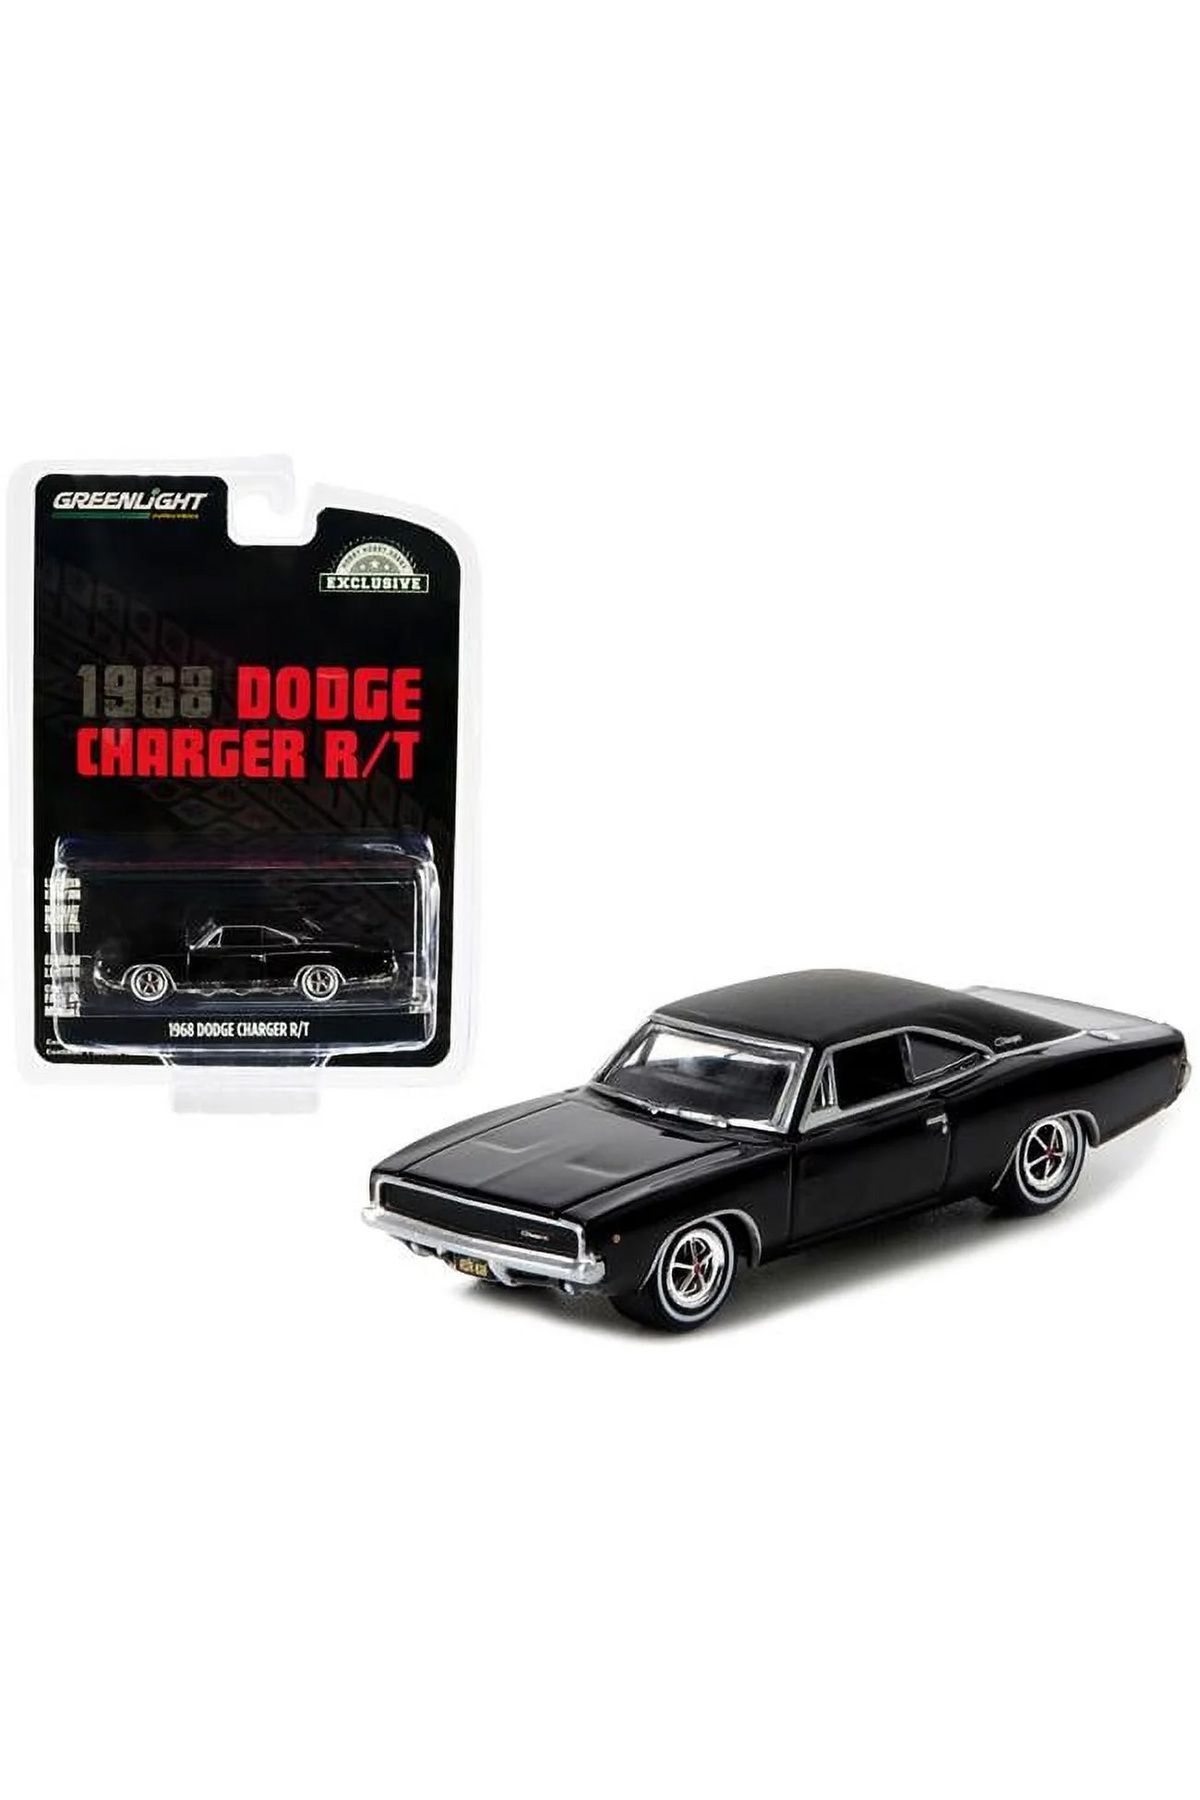 Greenlight 1968 Dodge Charger R/T - 1/64 Limited Edition